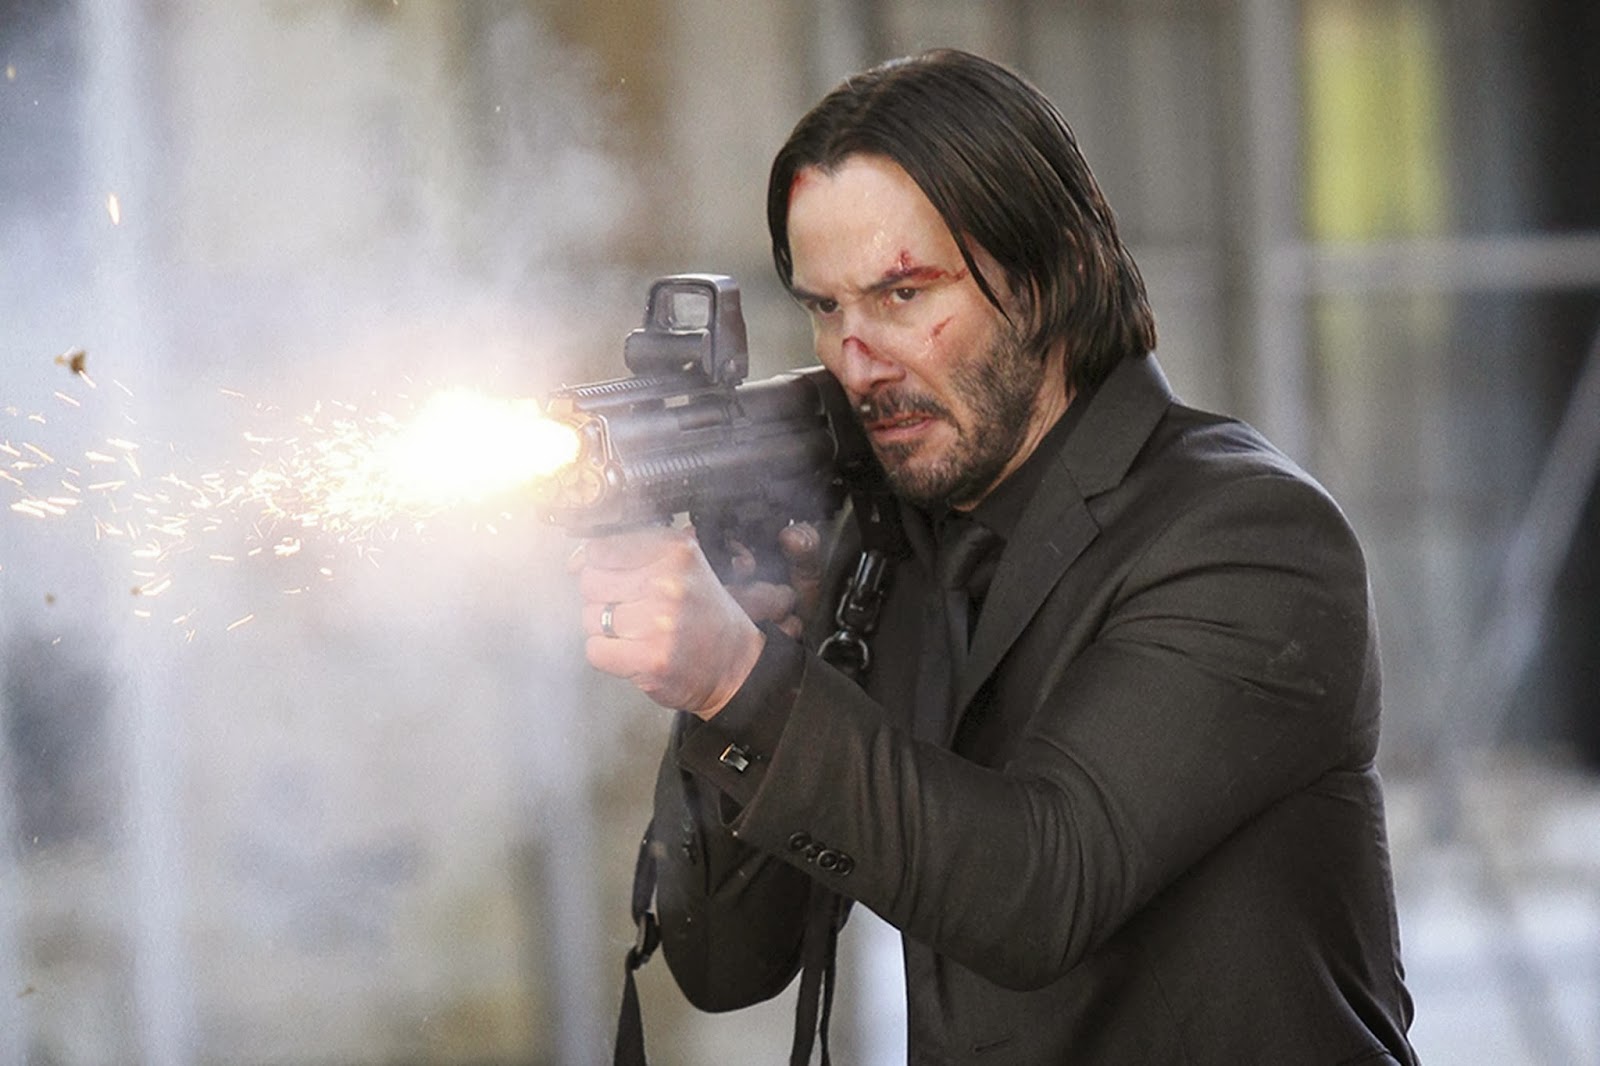 Action-packed John Wick is satisfyingly suspenseful